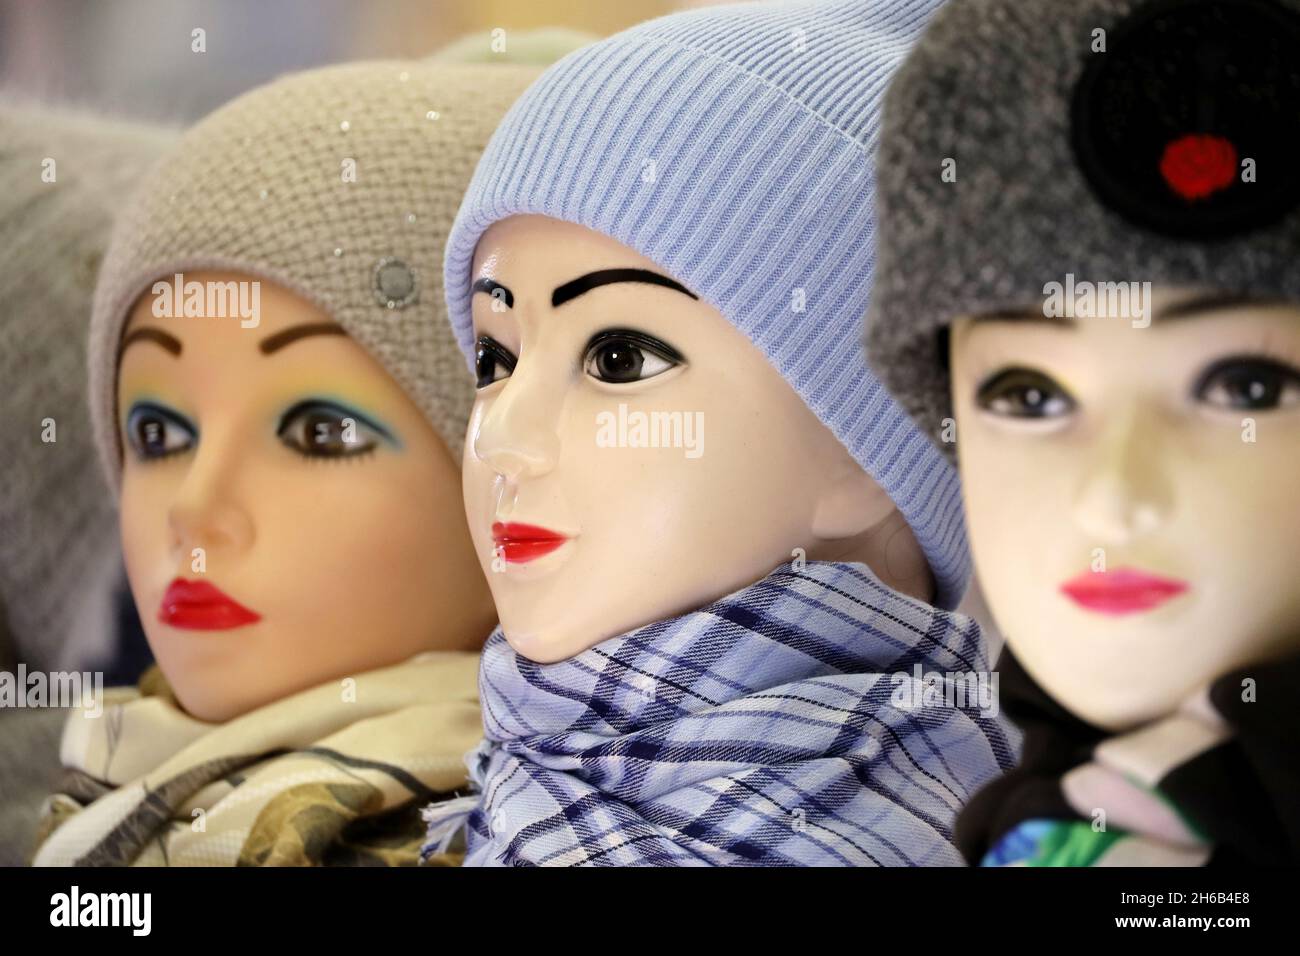 Female warm knitted hats and neckerchiefs on mannequins. Winter clothing store, woolen caps on sale Stock Photo